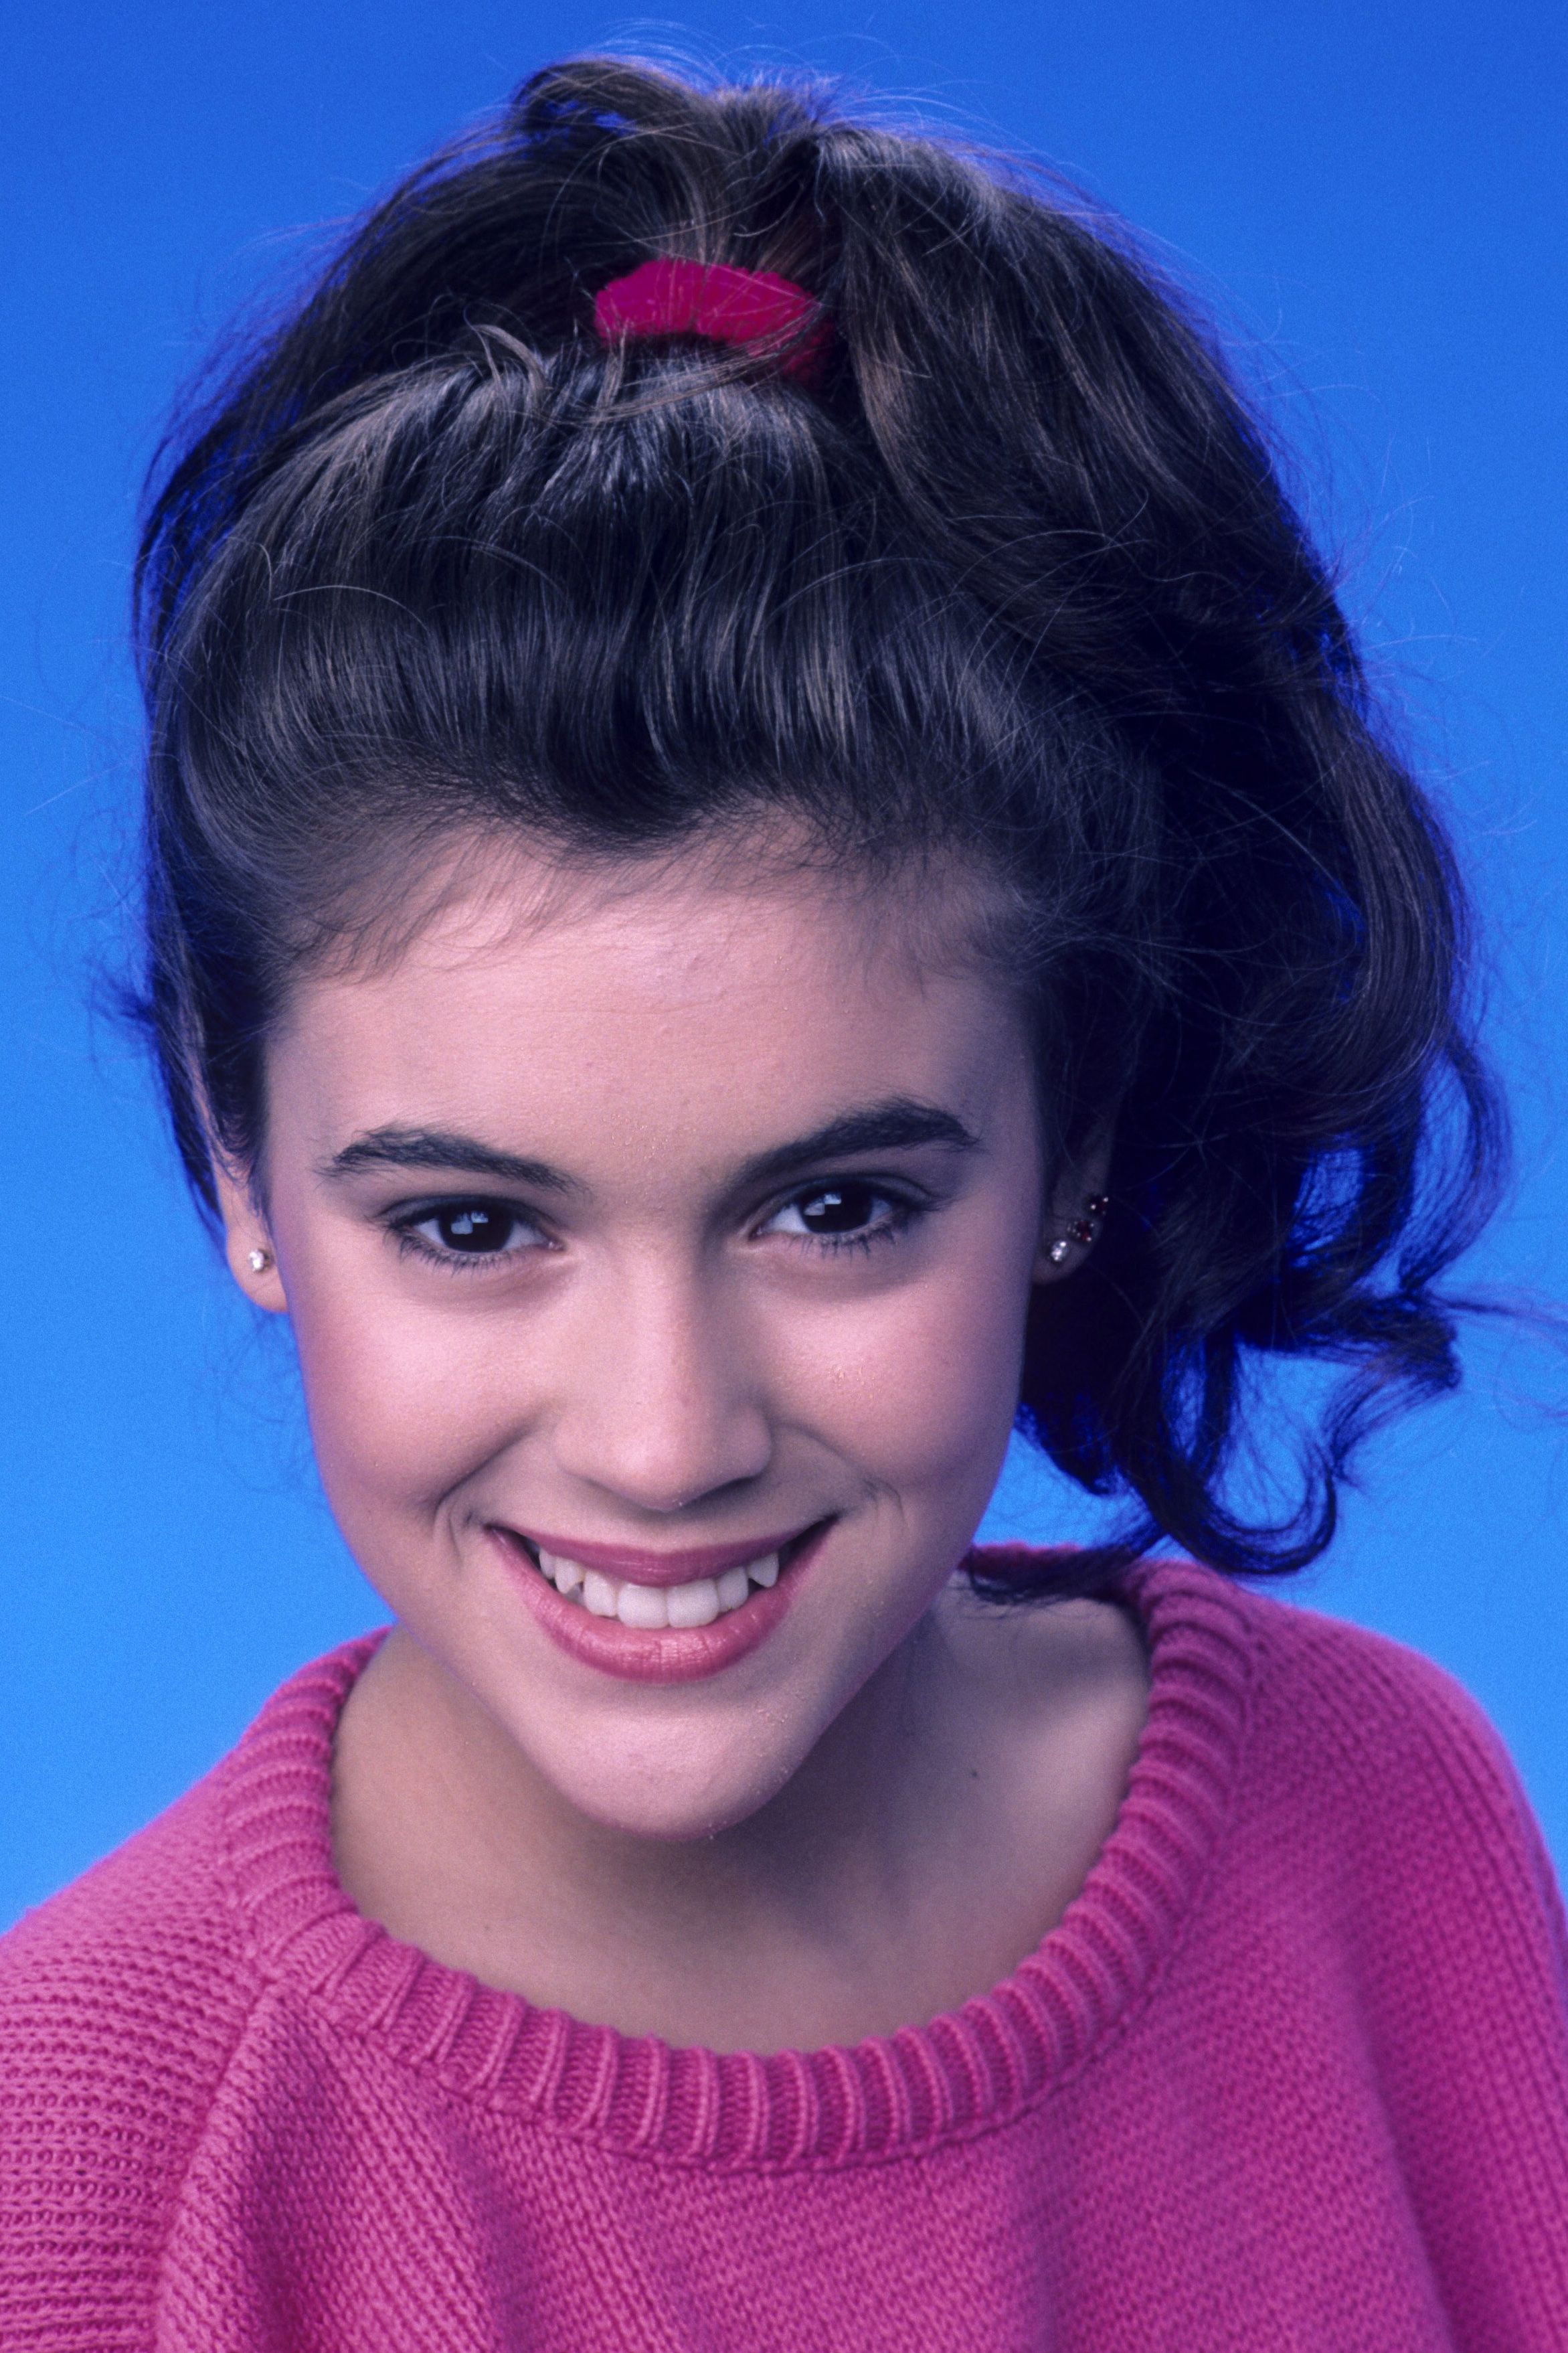 These Were Your Beauty Idols If You Grew Up in the 1980s